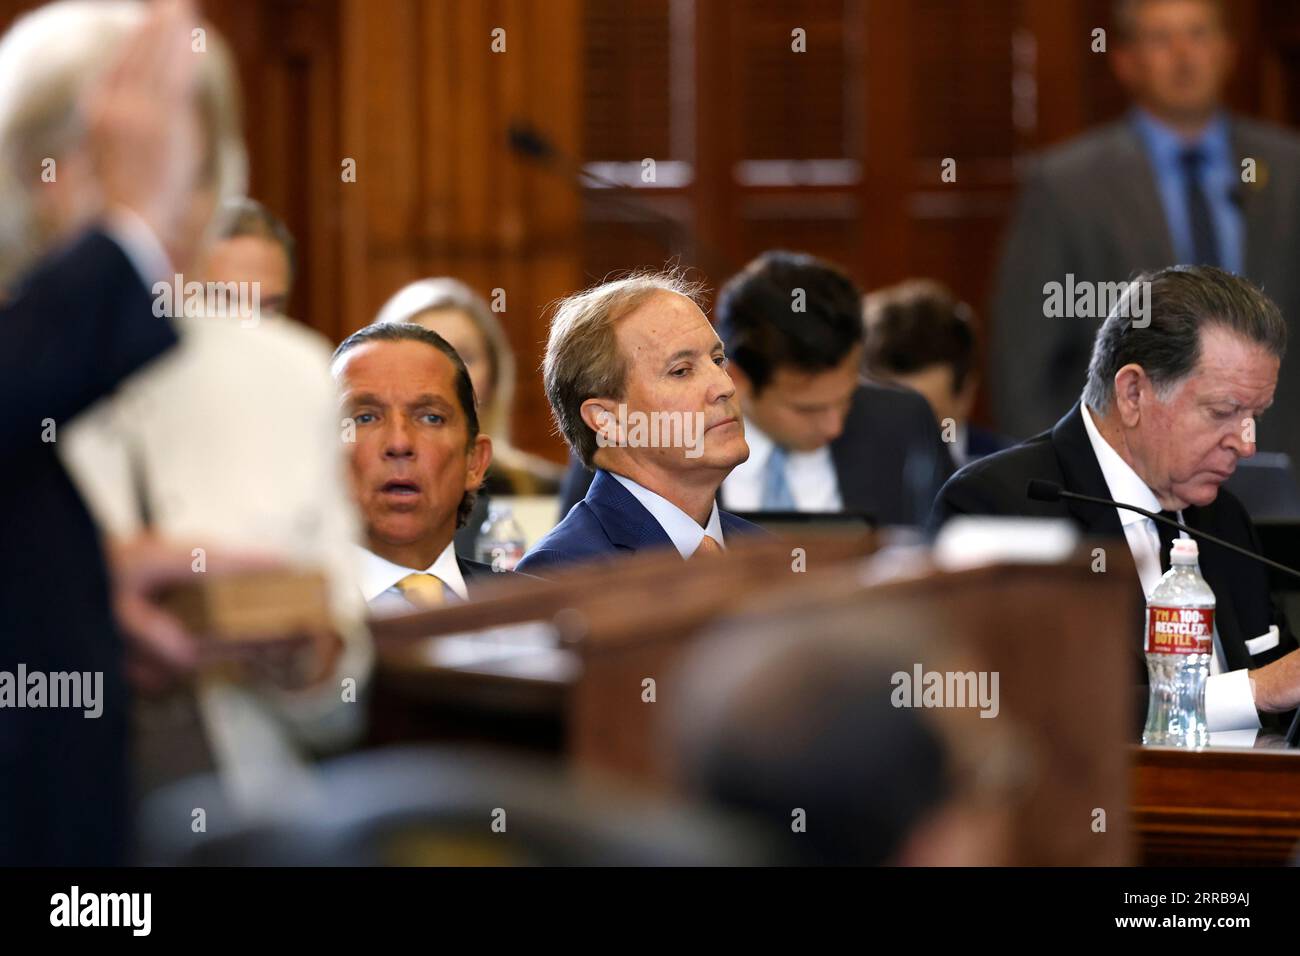 Texas Attorney General Ken Paxton (center) sits next to attorneys Tony Buzbee (center left) and Dan Cogdell (right) as Texas Sen. Robert Nichols (left), R-Jacksonville, is sworn in during the first day of Paxton’s impeachment trial in the Texas Senate chambers at the Texas State Capitol in Austin on Tuesday, Sept. 5, 2023. The Texas House, including a majority of its GOP members, voted to impeach Paxton for alleged corruption in May. (Juan Figueroa/Pool via The Dallas Morning News) Stock Photo